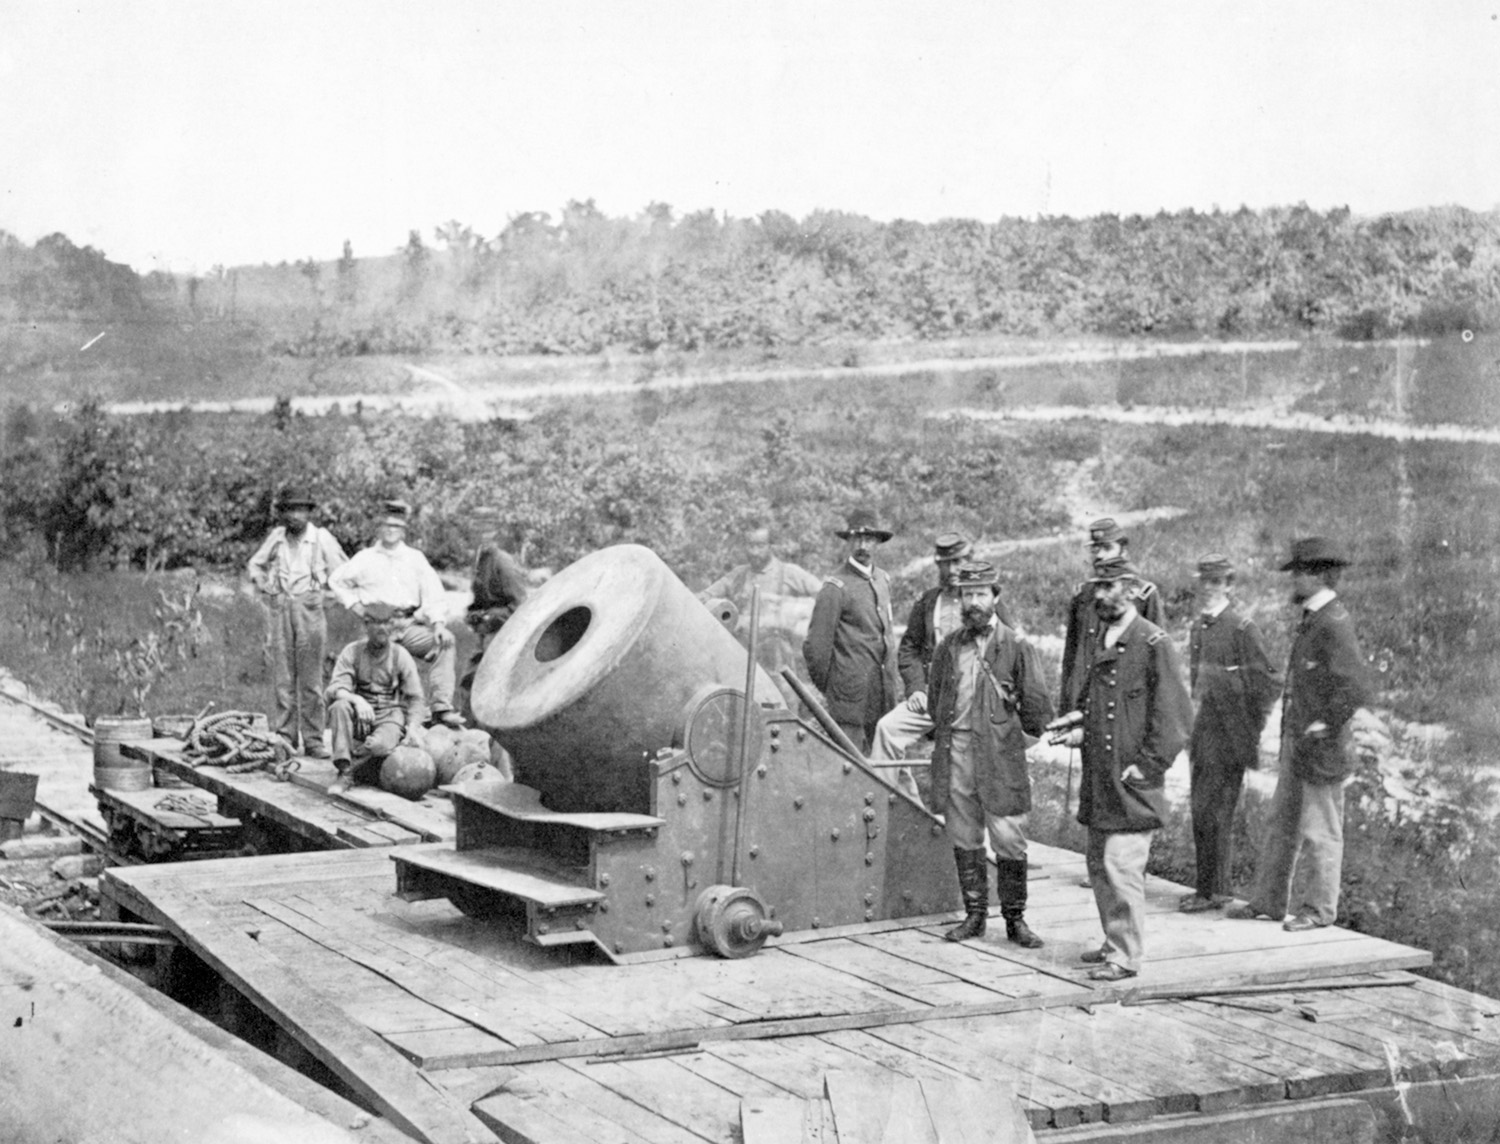 This mortar, called the Dictator, was hauled into position at Petersburg, Virginia, by railroad. Its aim was then adjusted by curved railroad track. Crews could refine the trajectory by measuring out the powder charge.